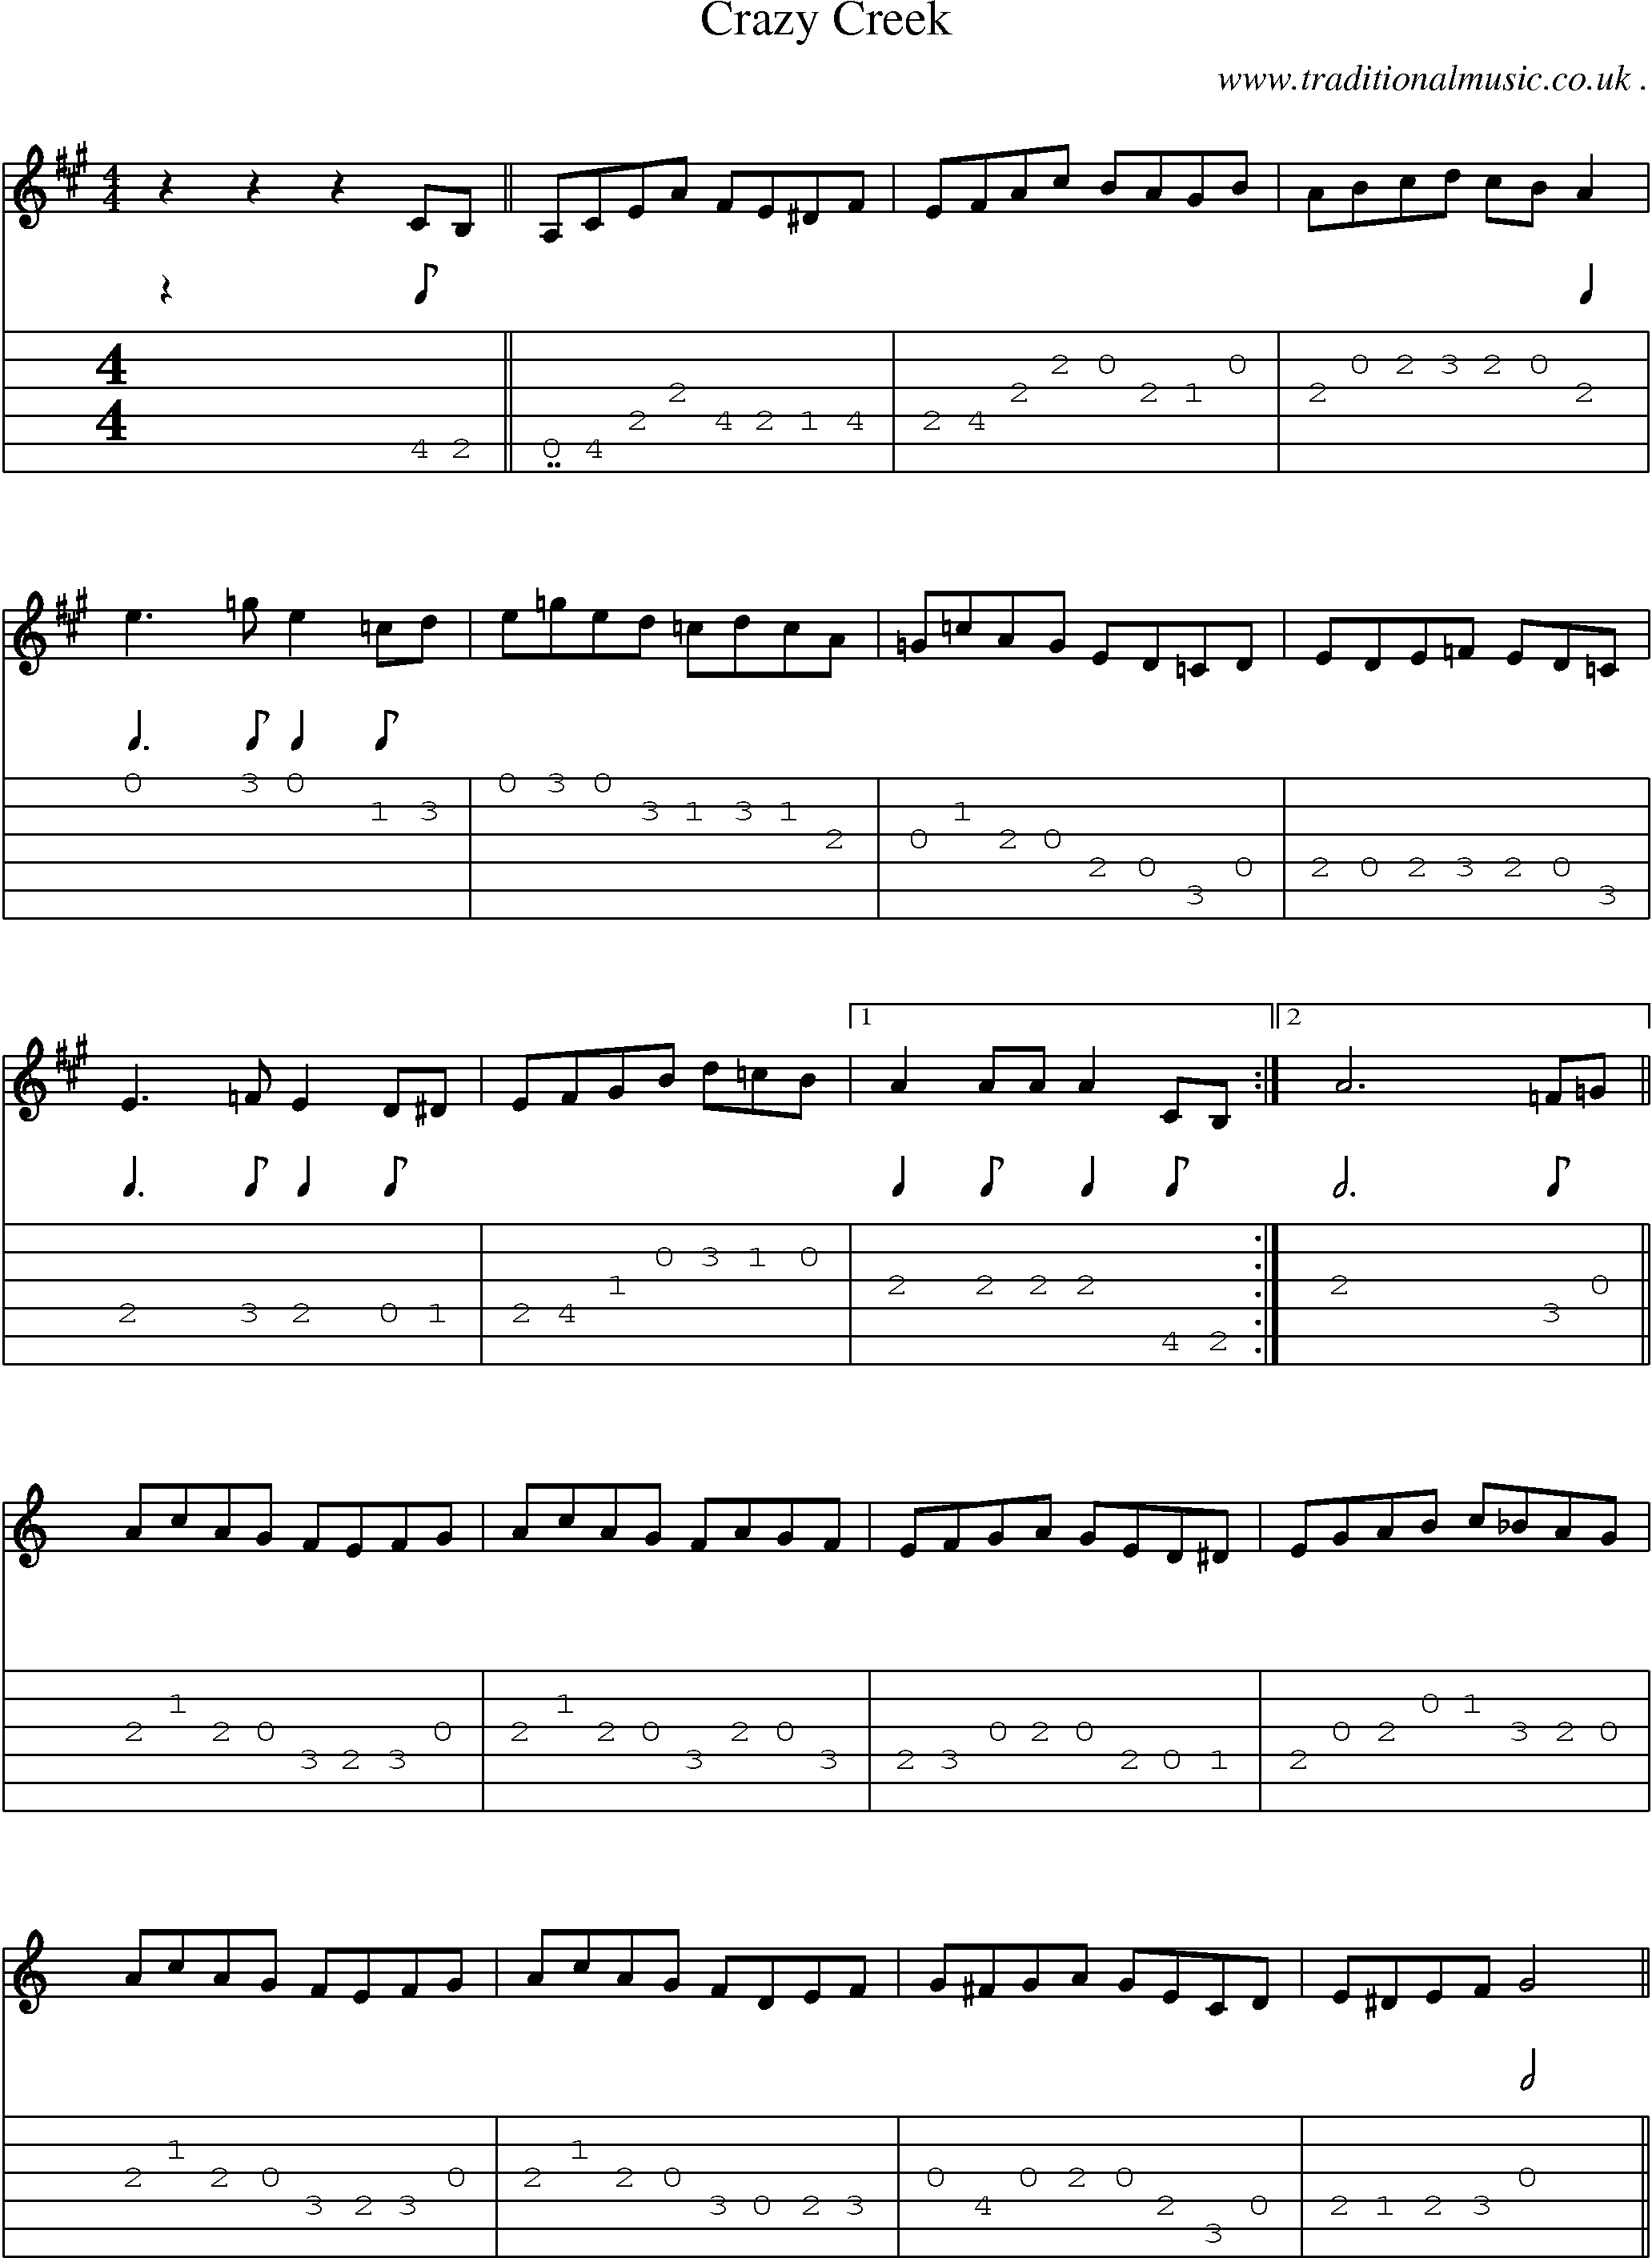 Sheet-Music and Guitar Tabs for Crazy Creek